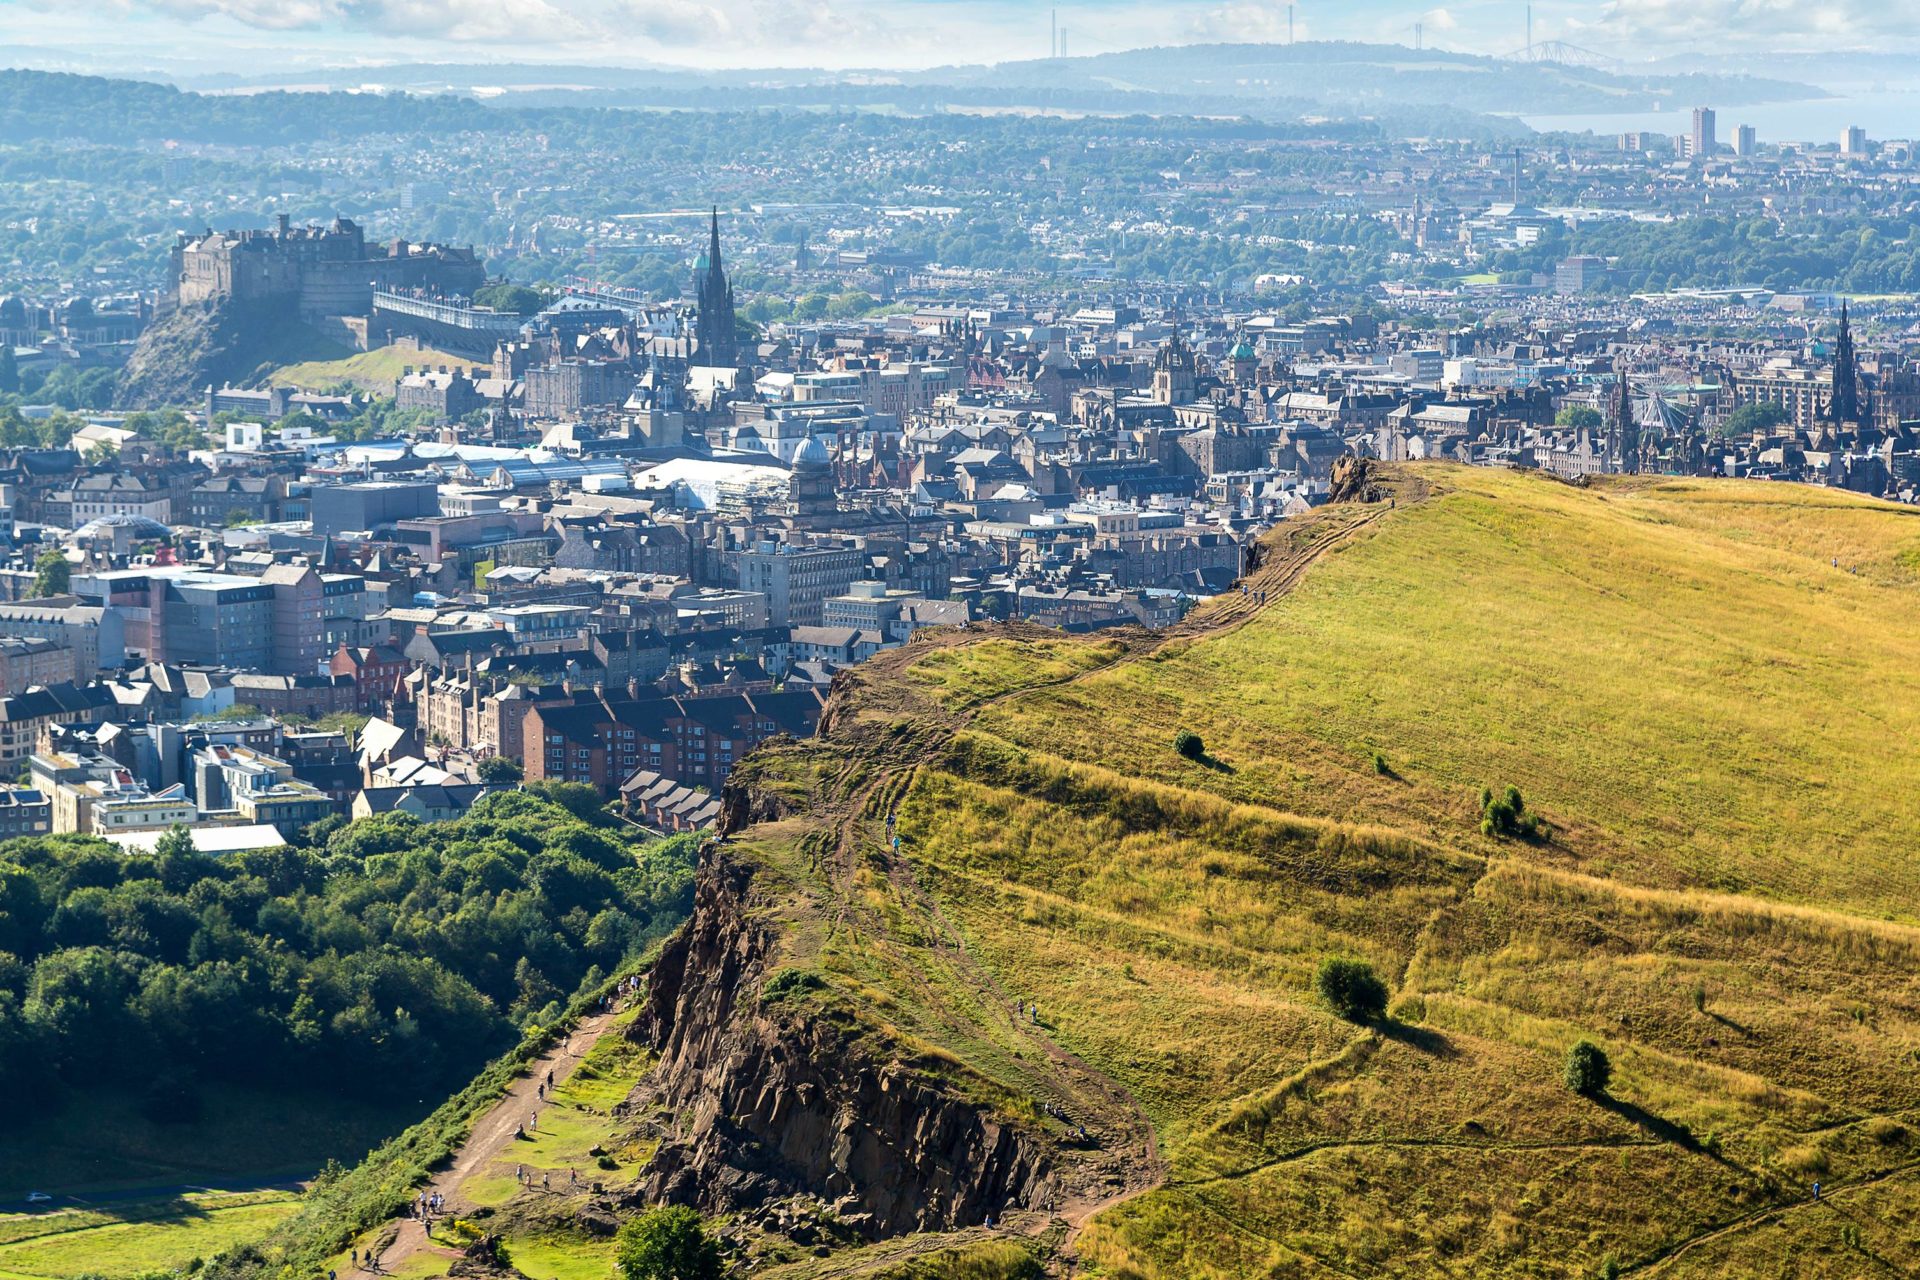 Edinburgh offers the vibrancy of a capital combined with comparatively low living costs - where to find a tech job in the UK